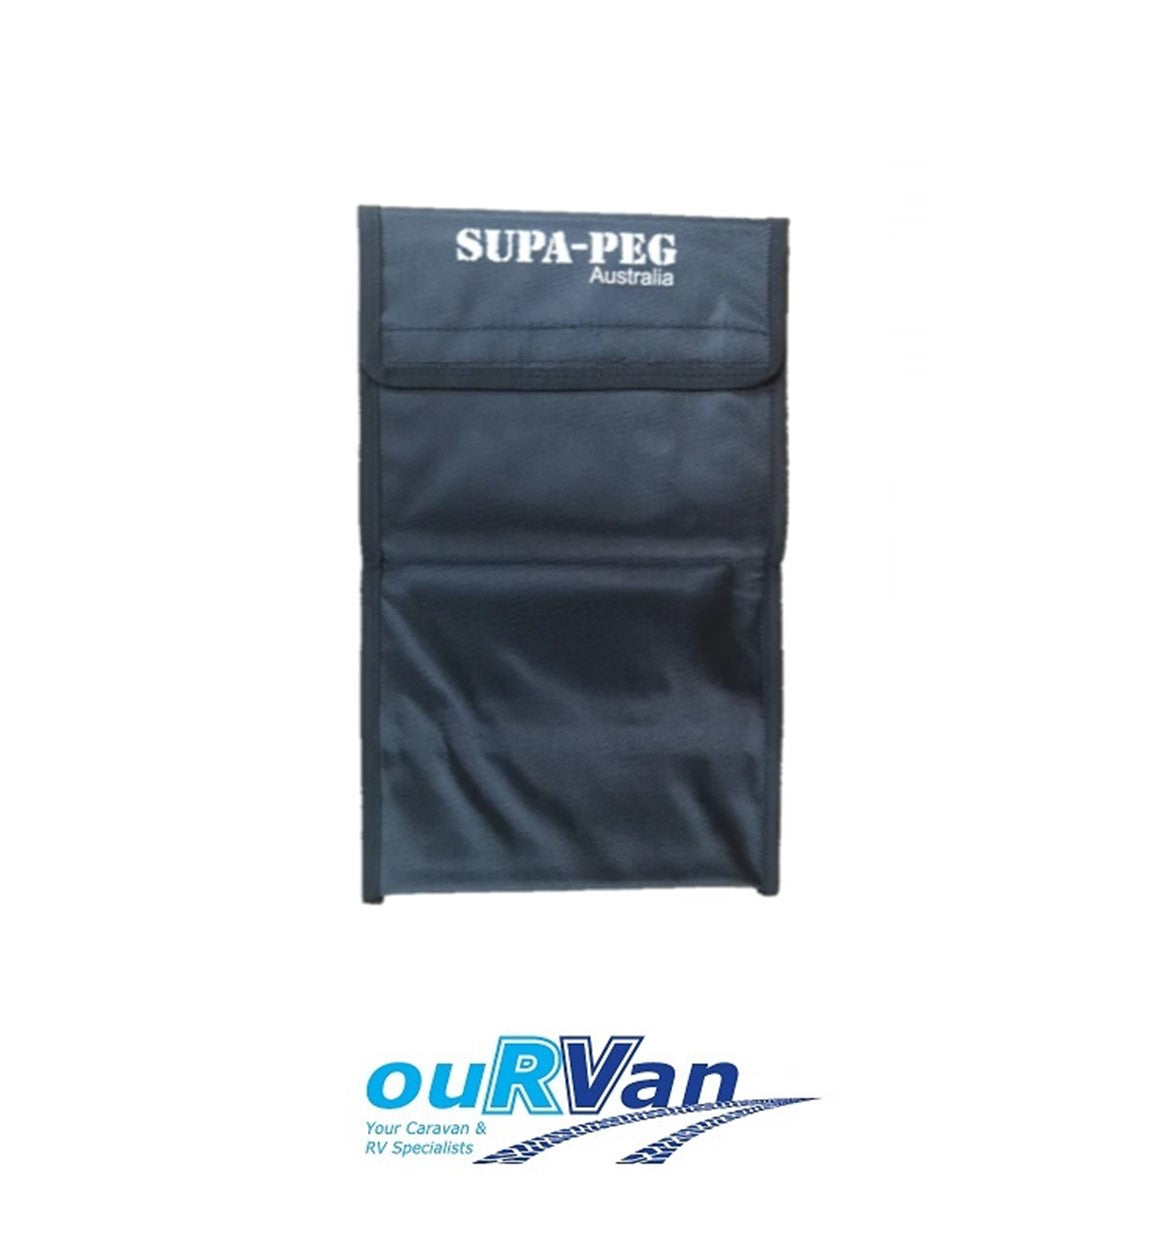 Tent Peg Bag Supa-peg Small Mould And Mildew Resistant